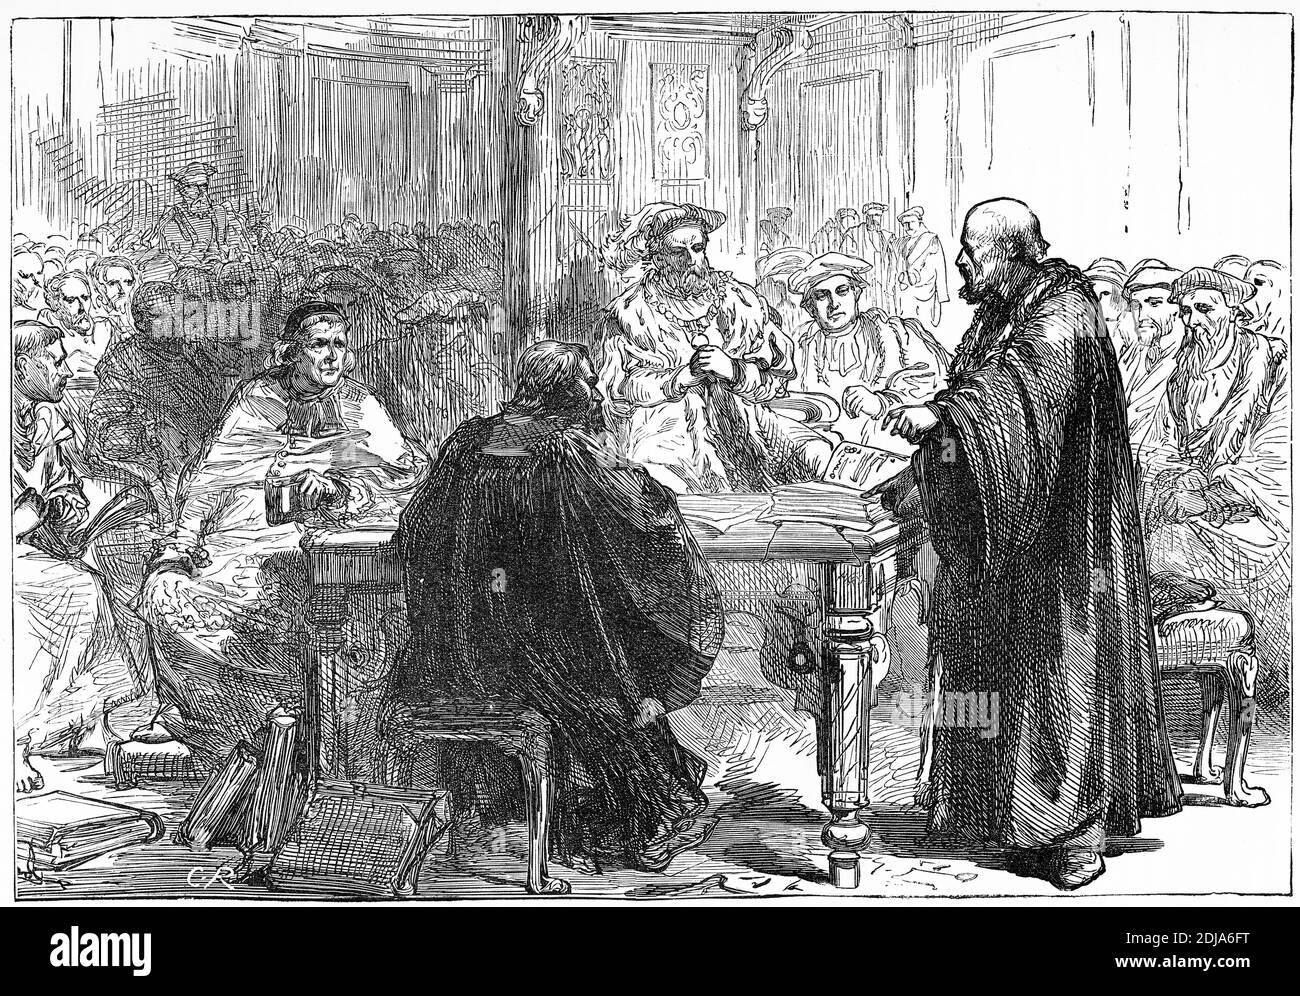 Engraving of Pastor Olaf at the 1593 ecclesiastical conference of the Lutheran Church of Sweden.  llustration from 'The history of Protestantism' by James Aitken Wylie (1808-1890), pub. 1878 Stock Photo